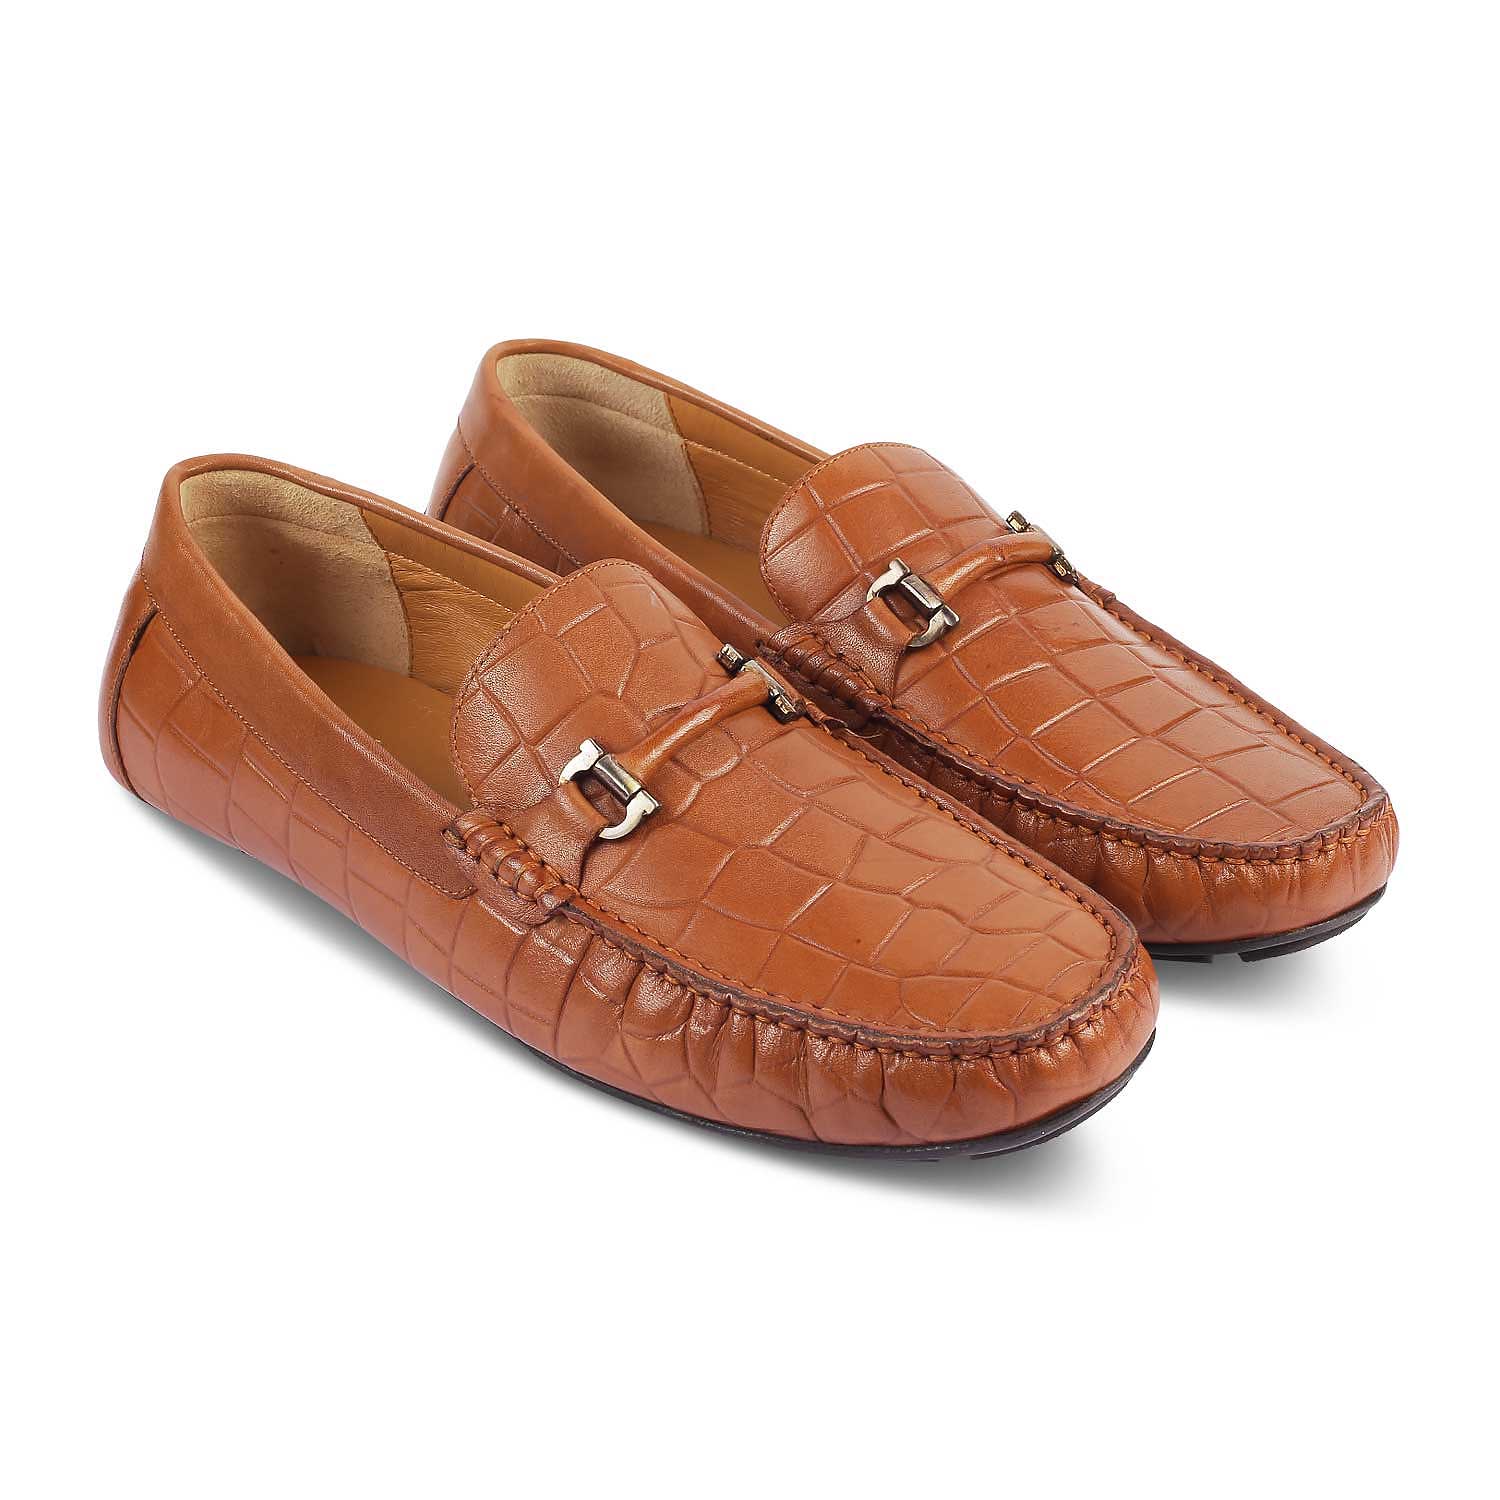 The Docks Tan Men's Leather Driving Loafers Tresmode - Tresmode